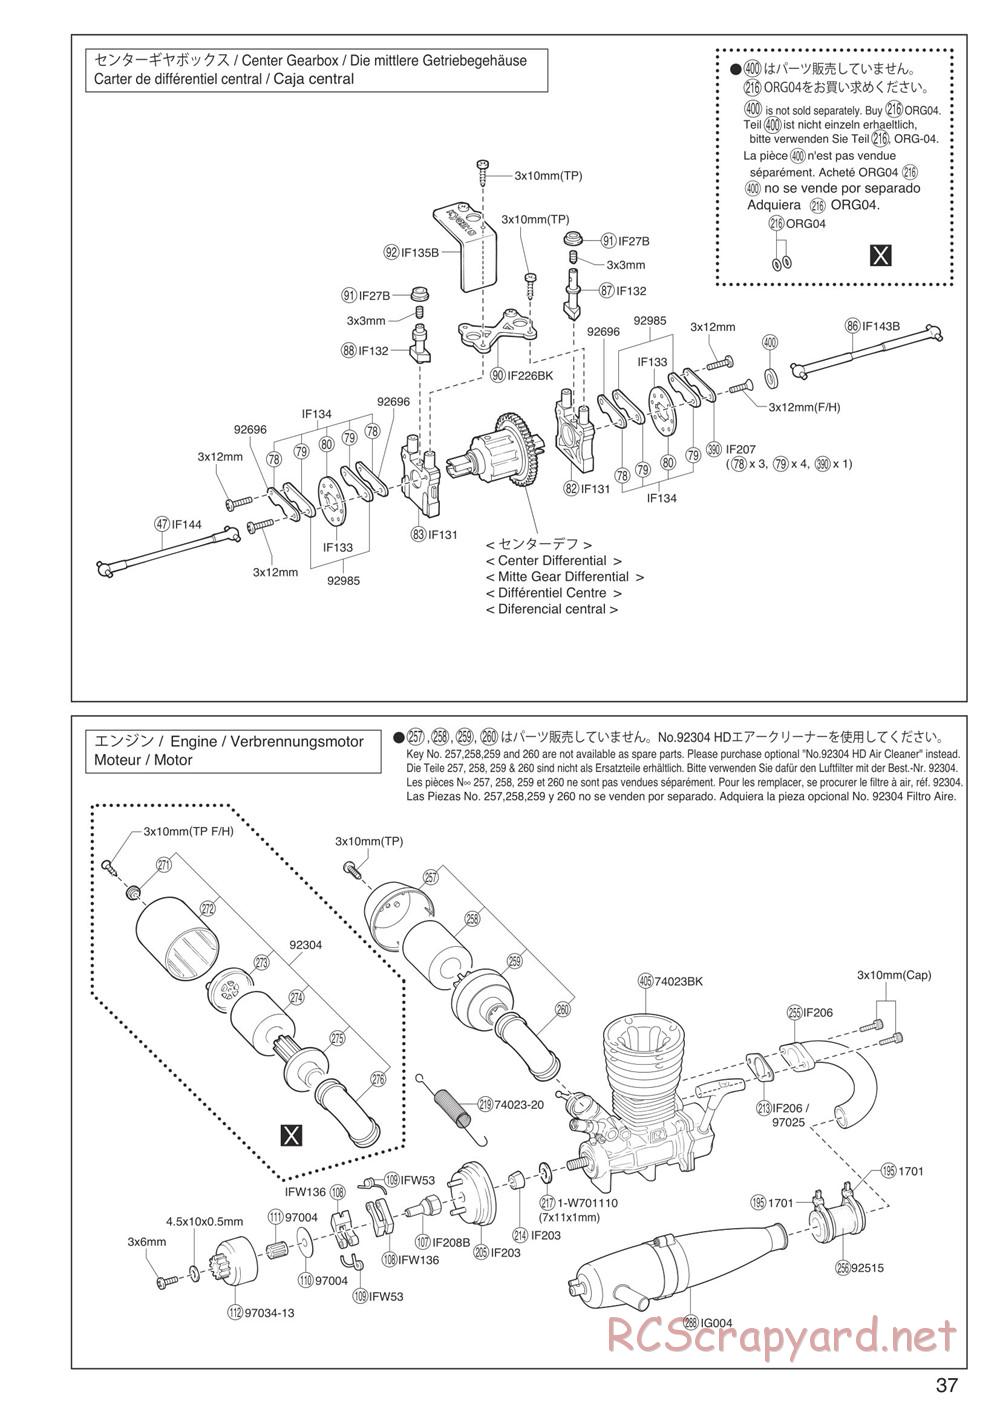 Kyosho - Inferno Neo - Exploded Views - Page 4